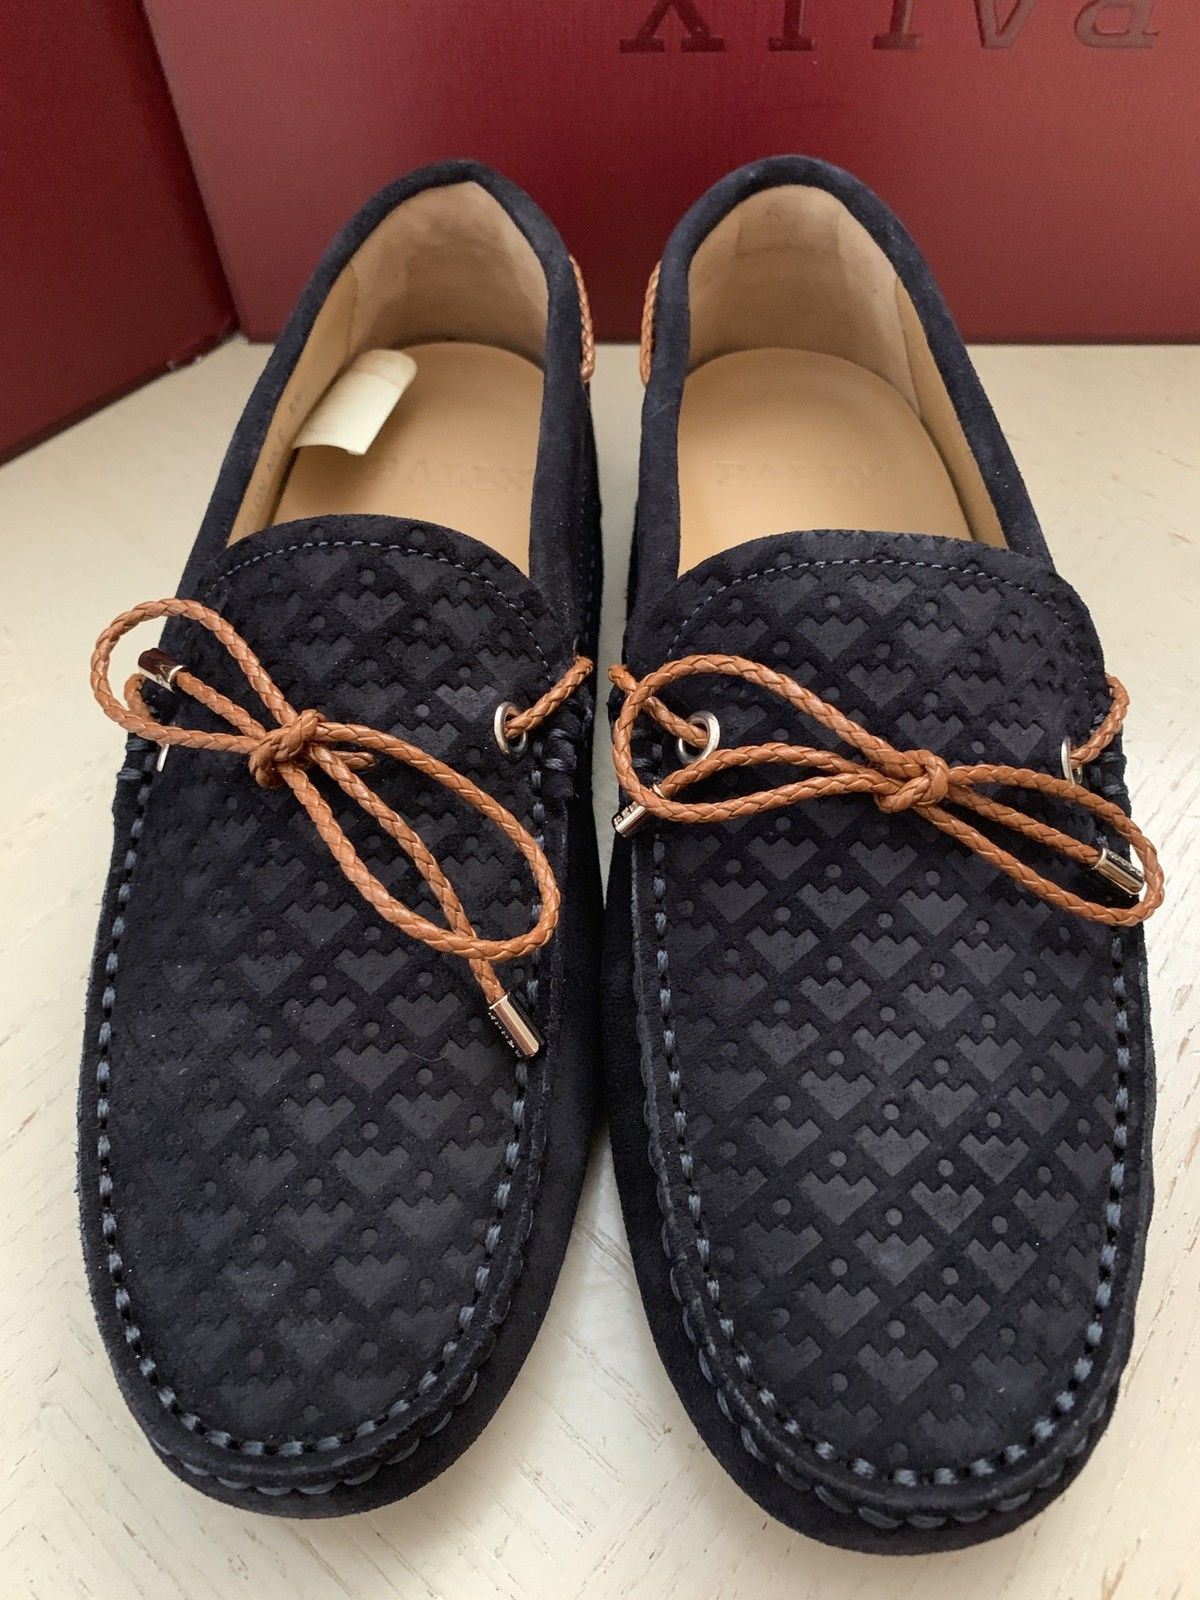 New $495 Bally Men Weilon Suide Driver Loafers Shoes Blue Navy 6.5 US Italy